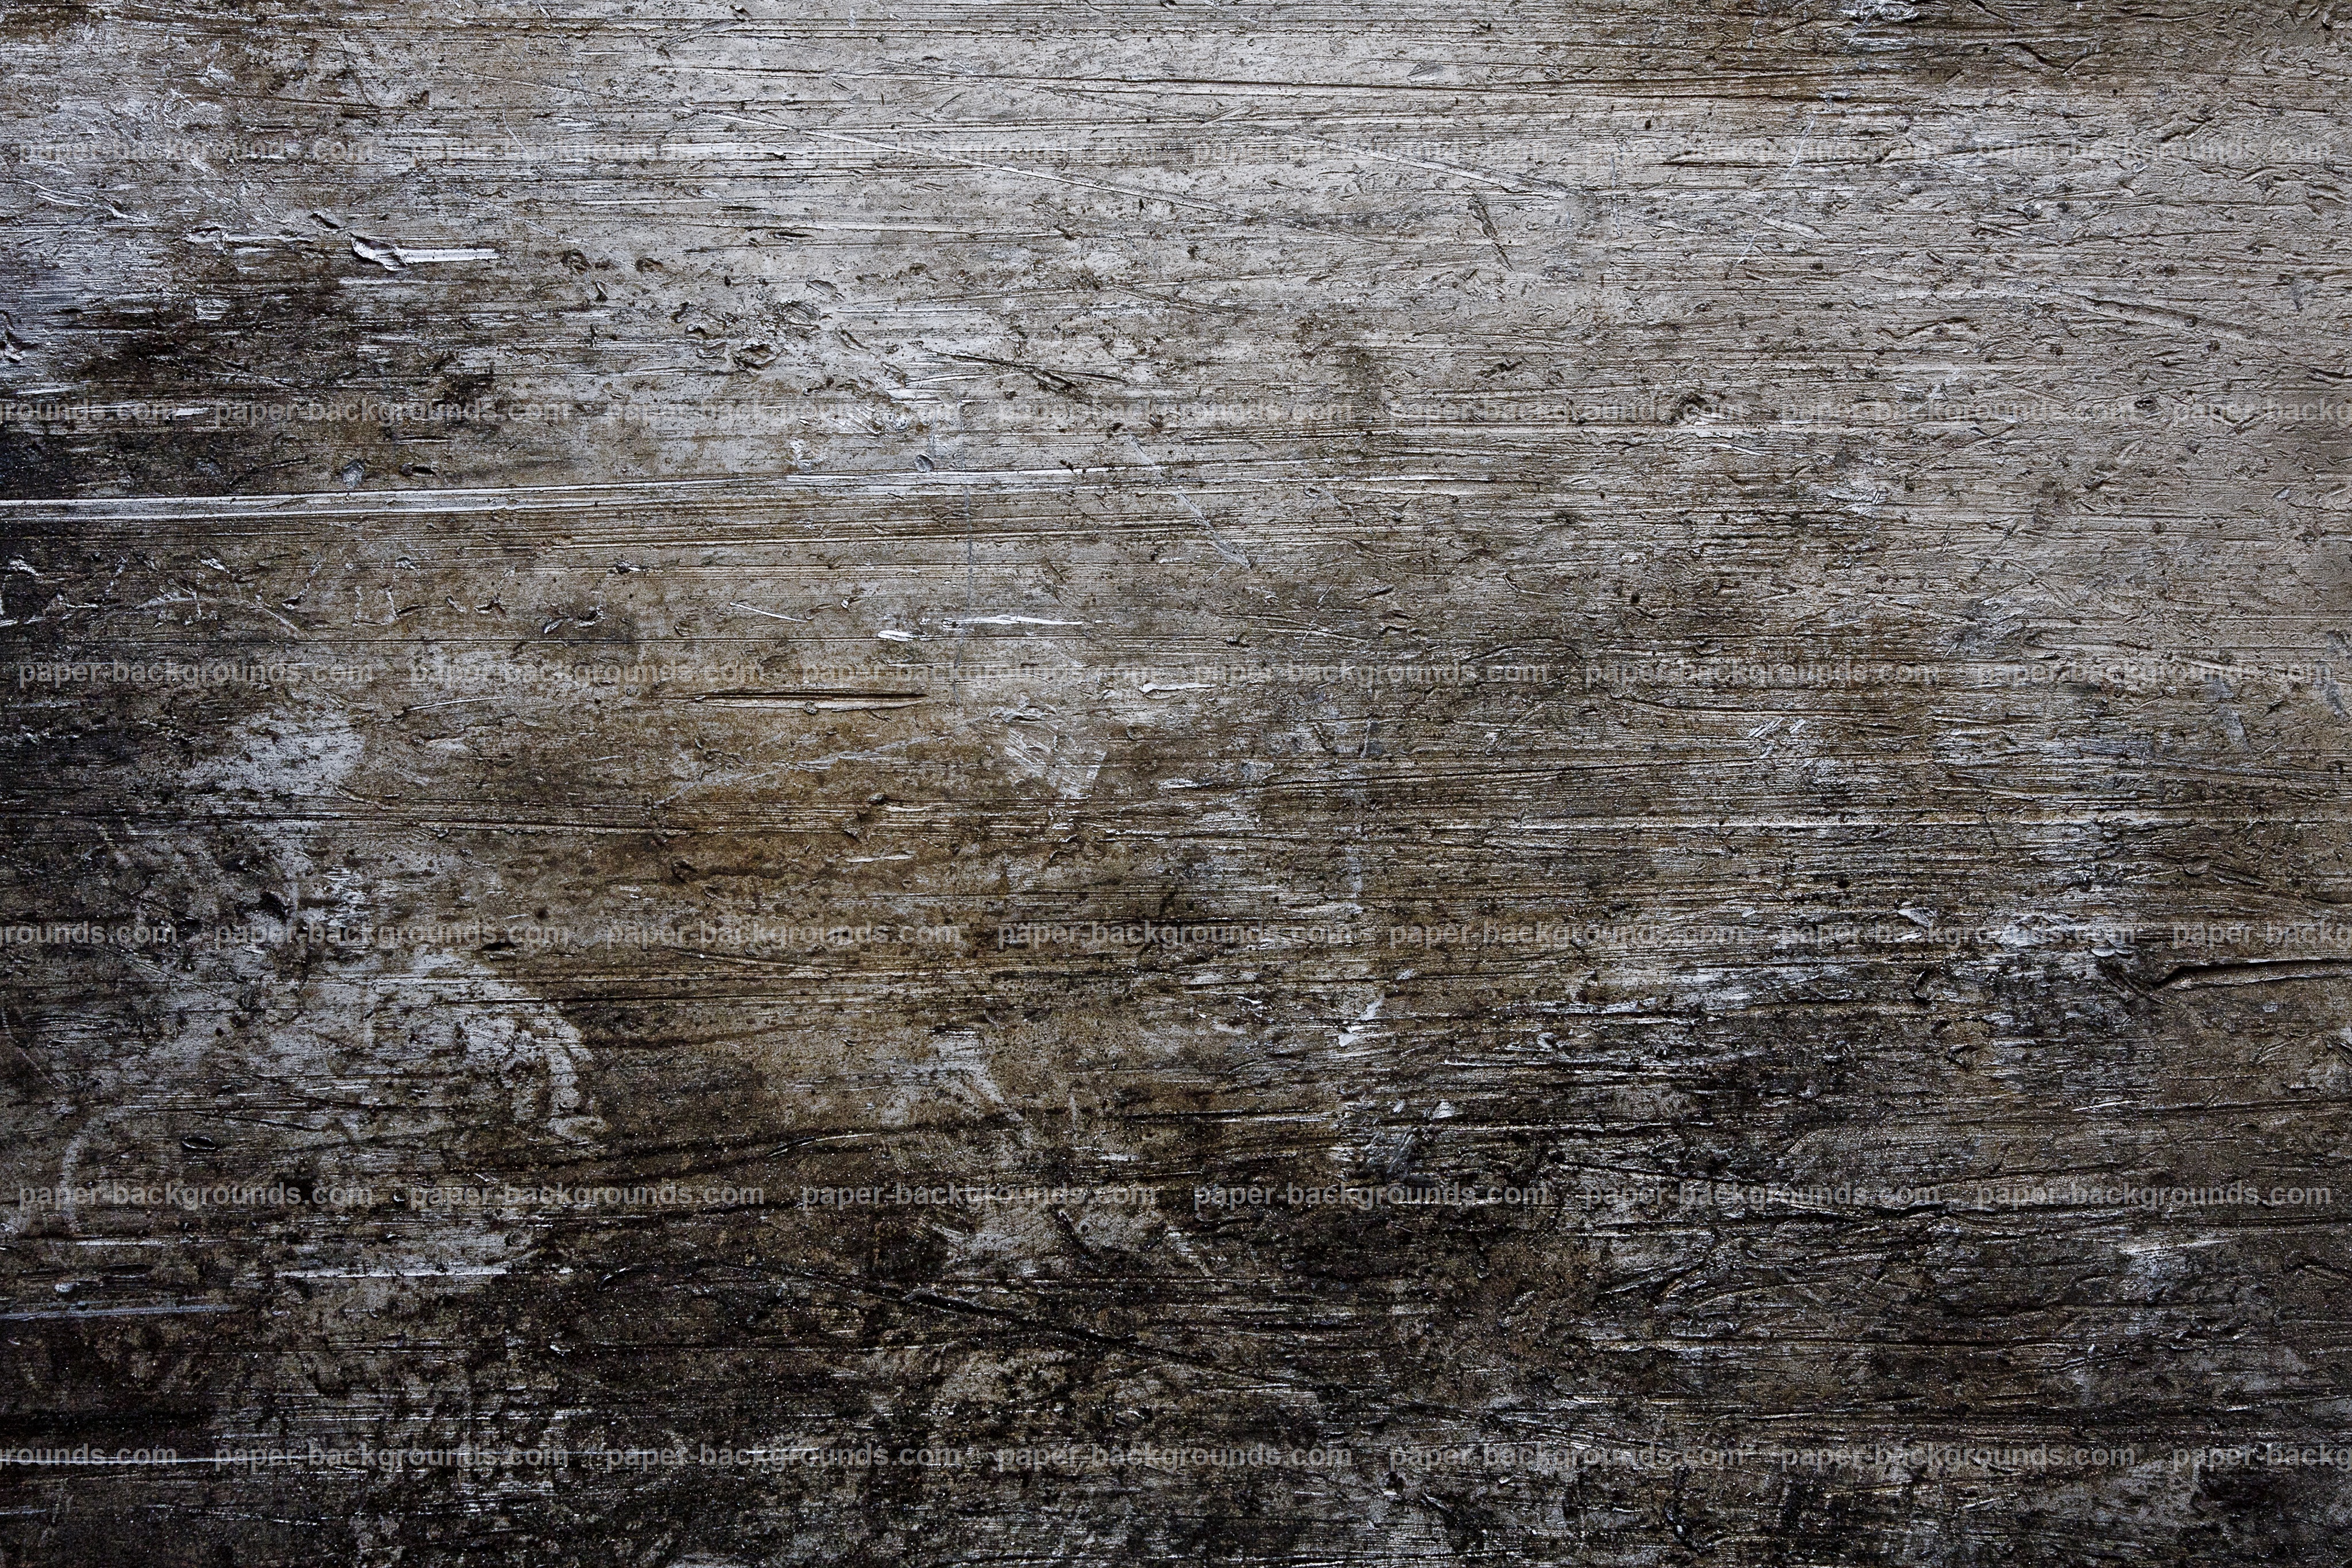 Paper Backgrounds | old-dust-scratched-metal-texture